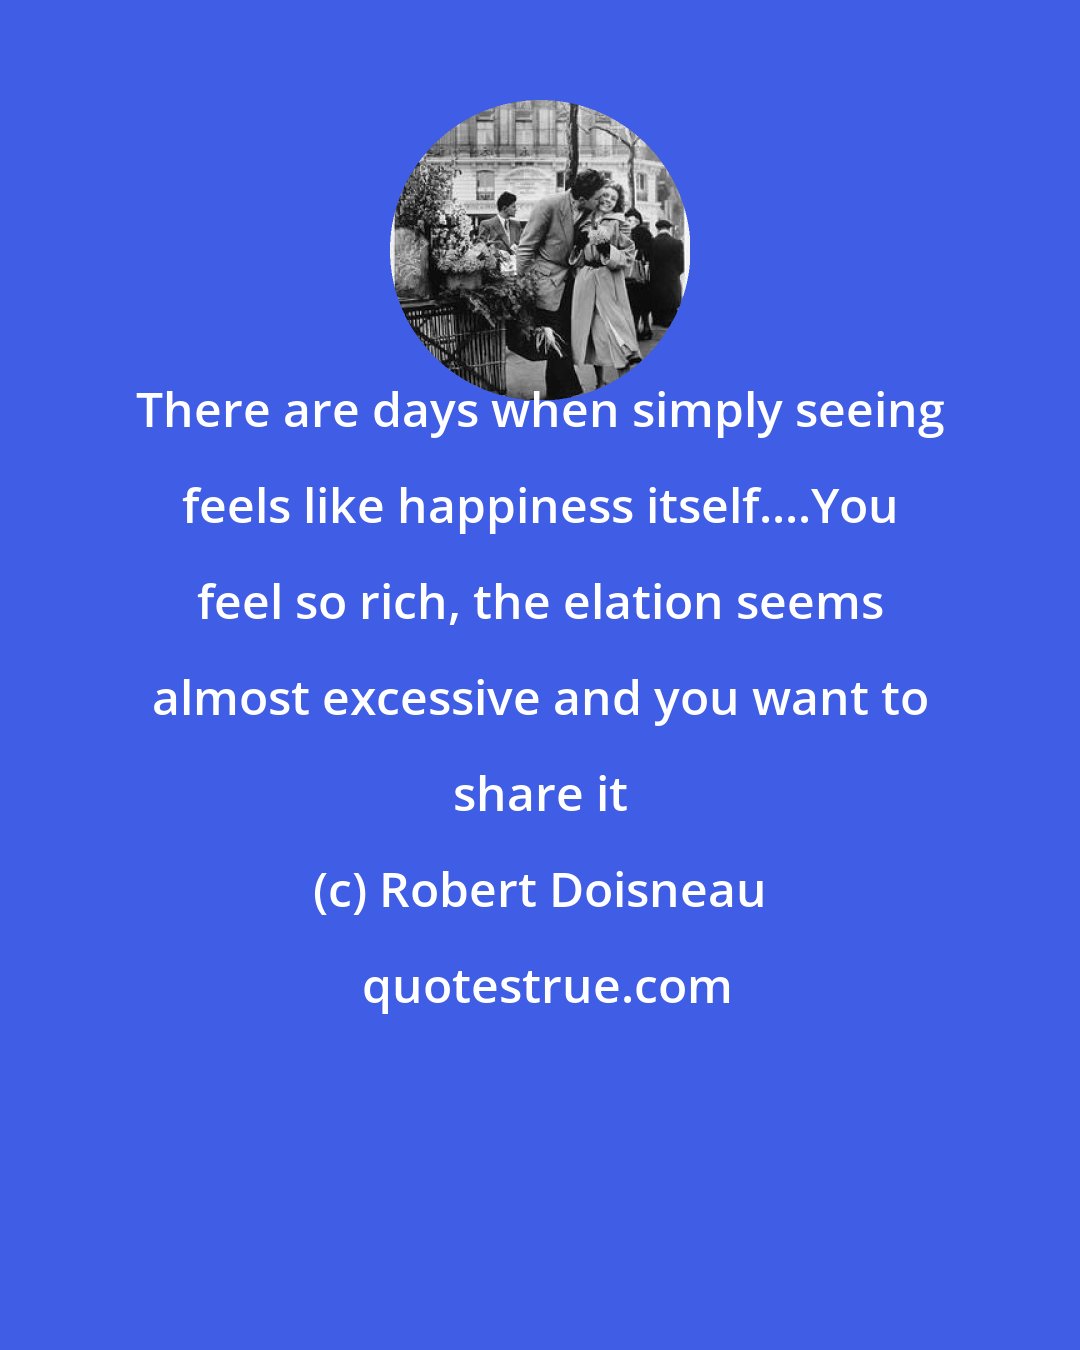 Robert Doisneau: There are days when simply seeing feels like happiness itself....You feel so rich, the elation seems almost excessive and you want to share it